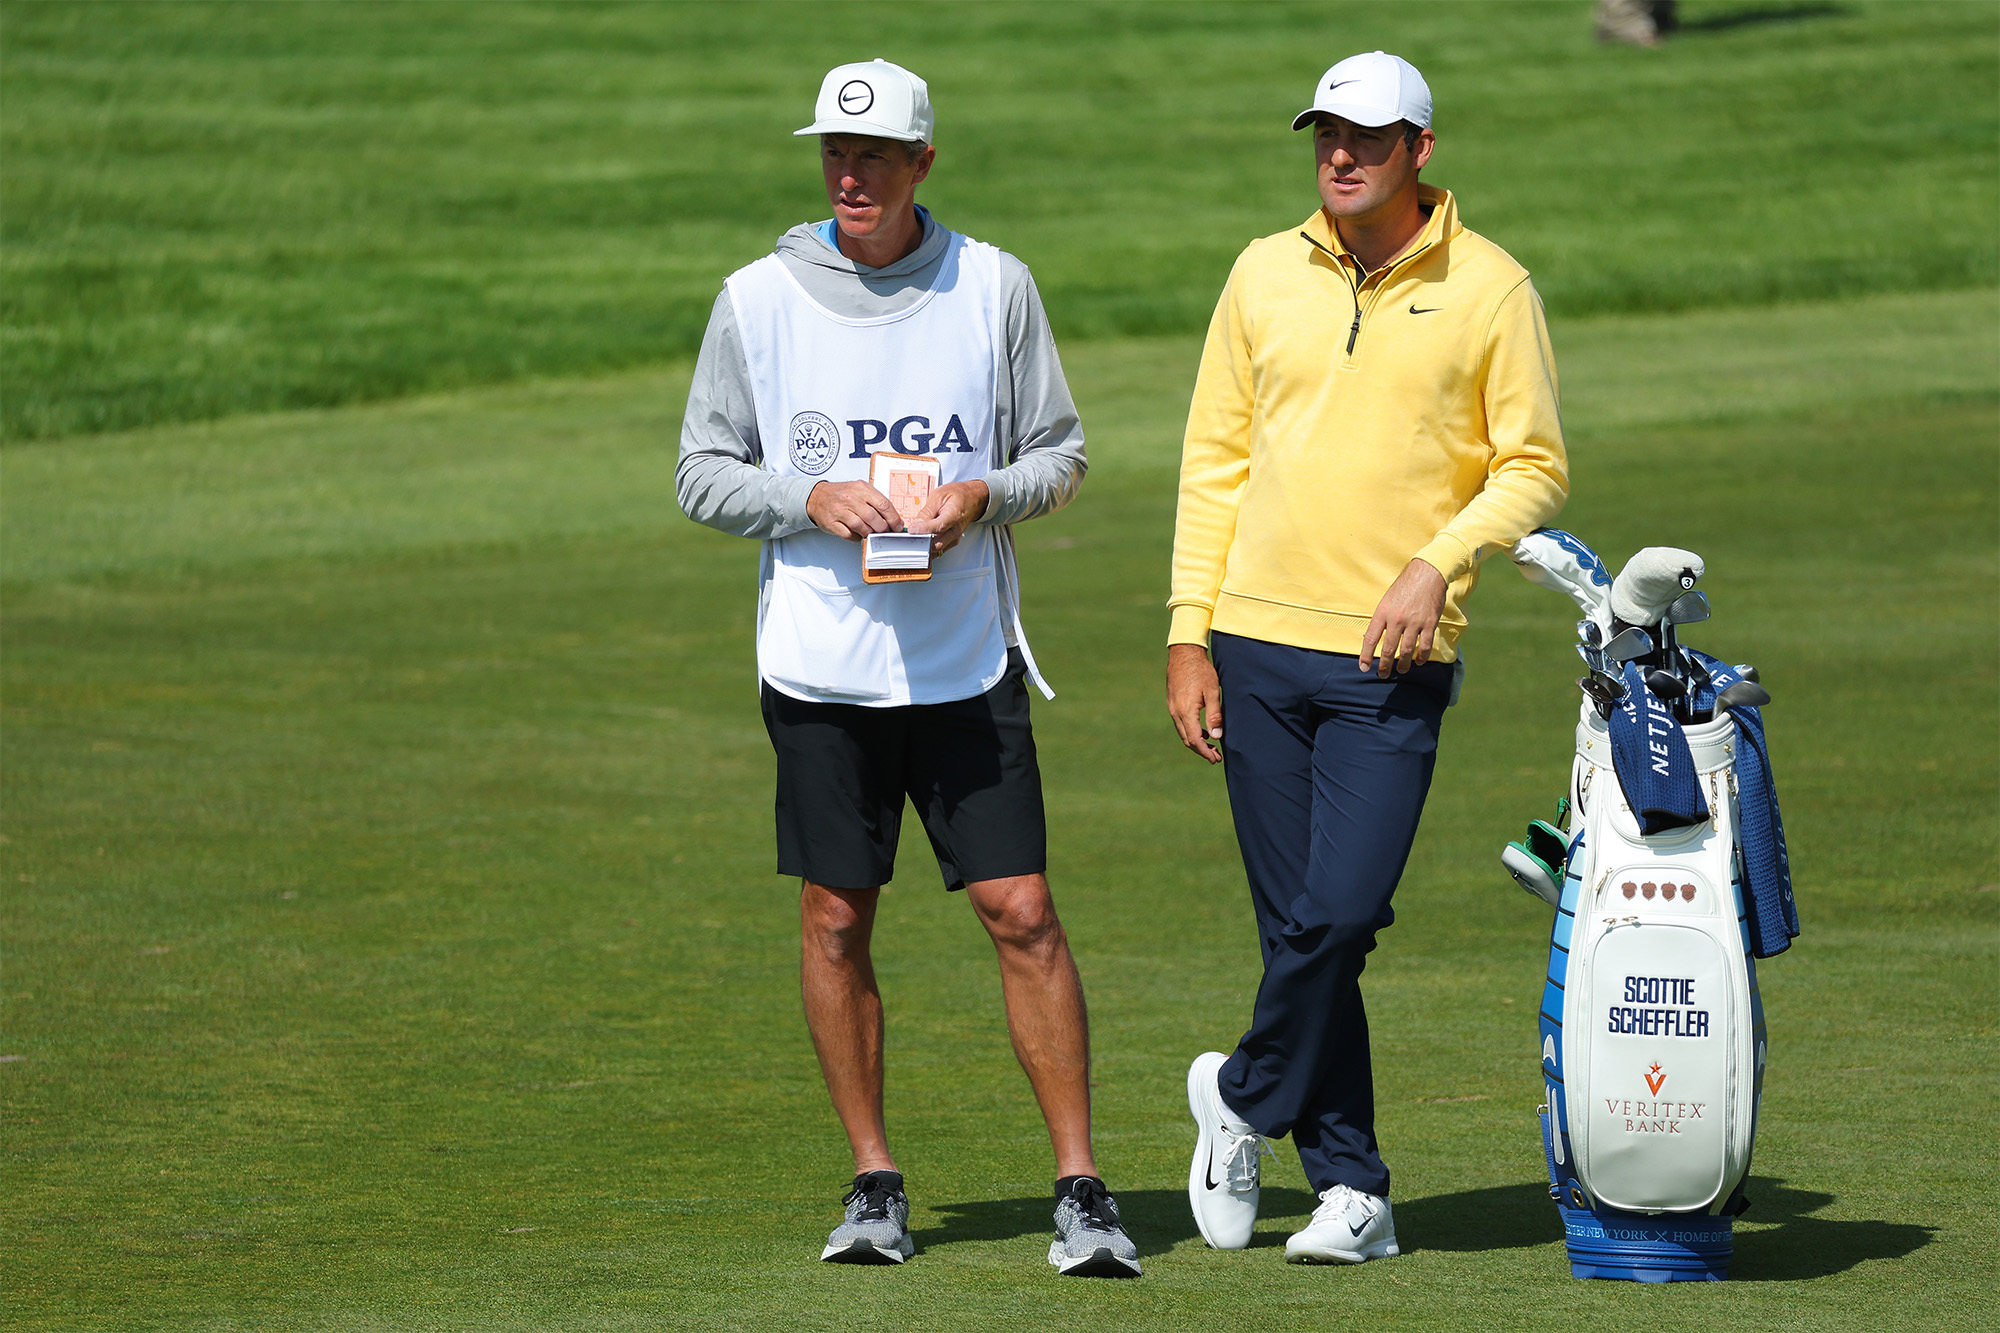 From Tee To Green: How Scottie Scheffler And His Caddie Conquer The Golf Course